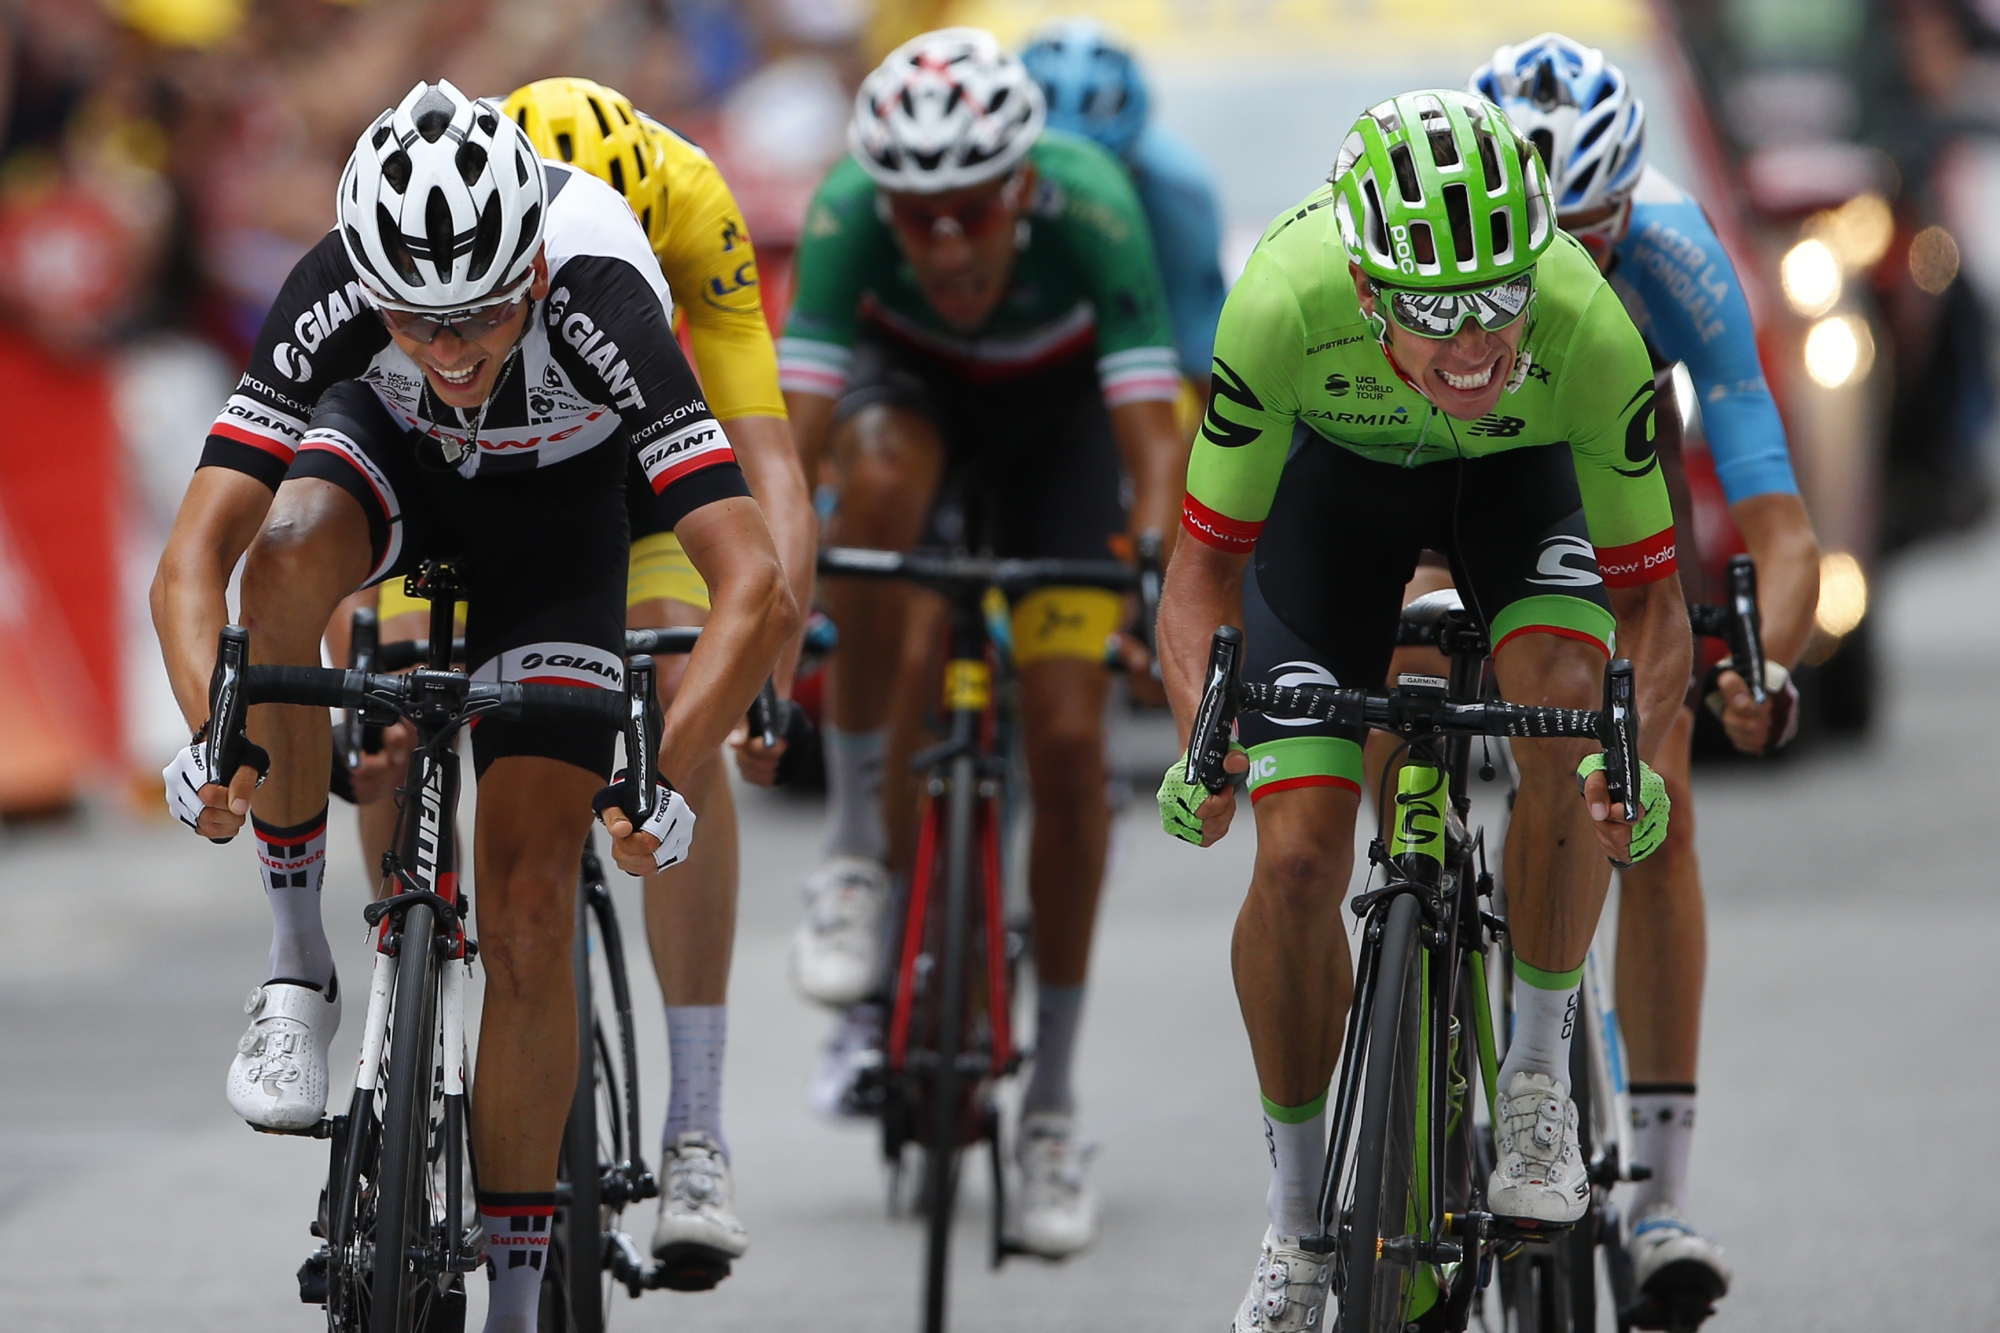 Colombia's Rigoberto Uran, right, crosses the finish line ahead of ahead of France's Warren Barguil, left, to win the ninth stage of the Tour de France cycling race over 181.5 kilometers (112.8 miles) with start in Nantua and finish in Chambery, France, Sunday, July 9, 2017. (AP Photo/Peter Dejong)